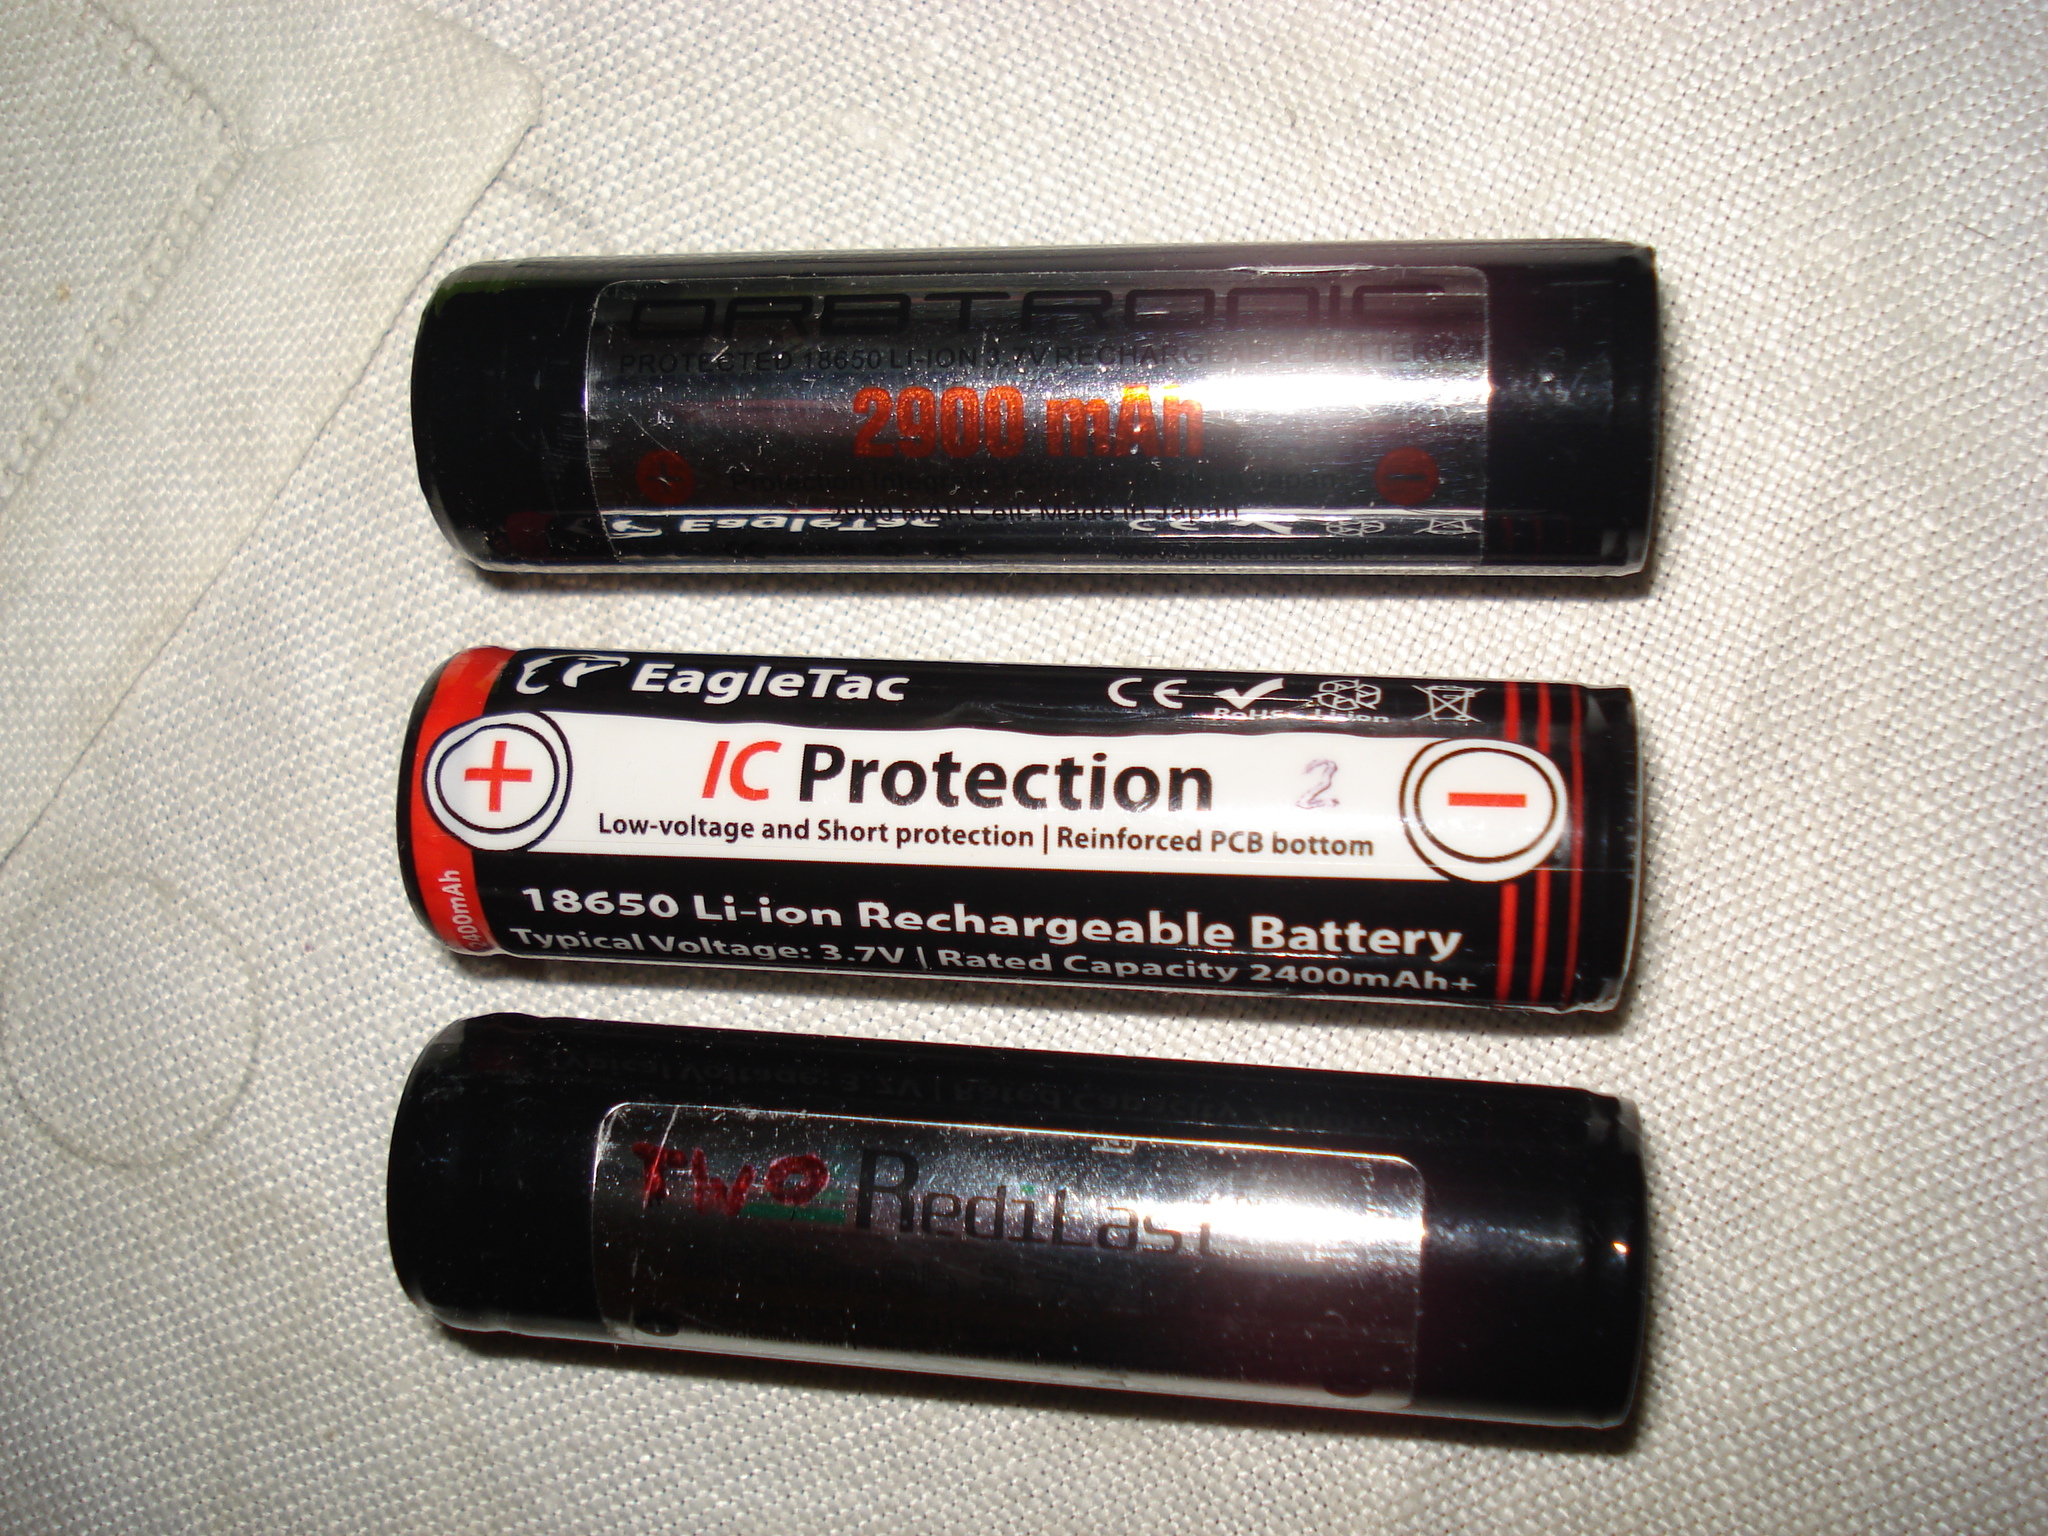 Essential Truths of Lithium-ion Battery Care -